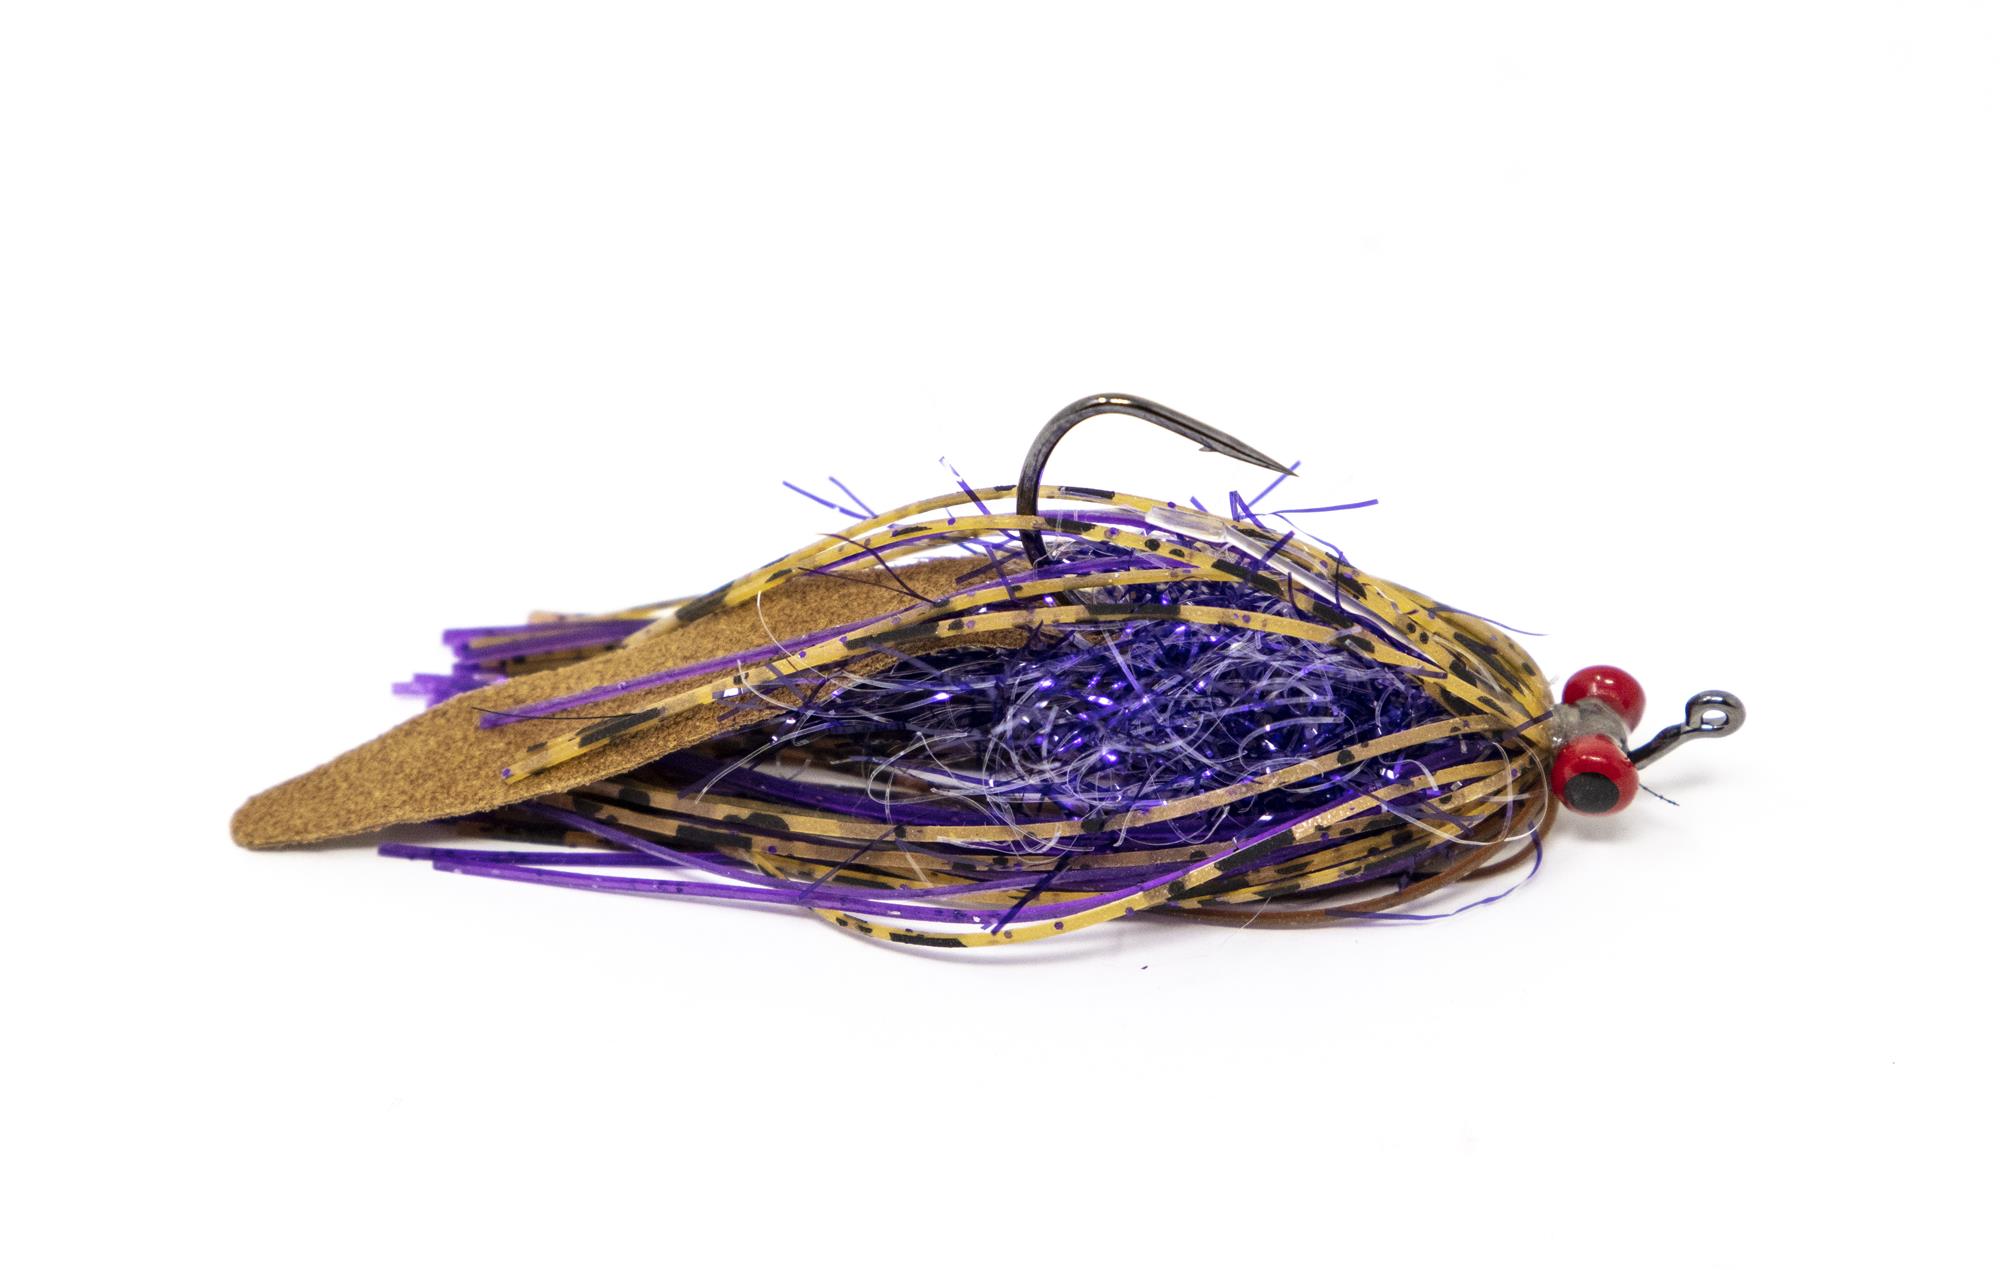 Pat Ehlers' Grim Reaper Fly is a top choice in our best smallmouth bass flies.